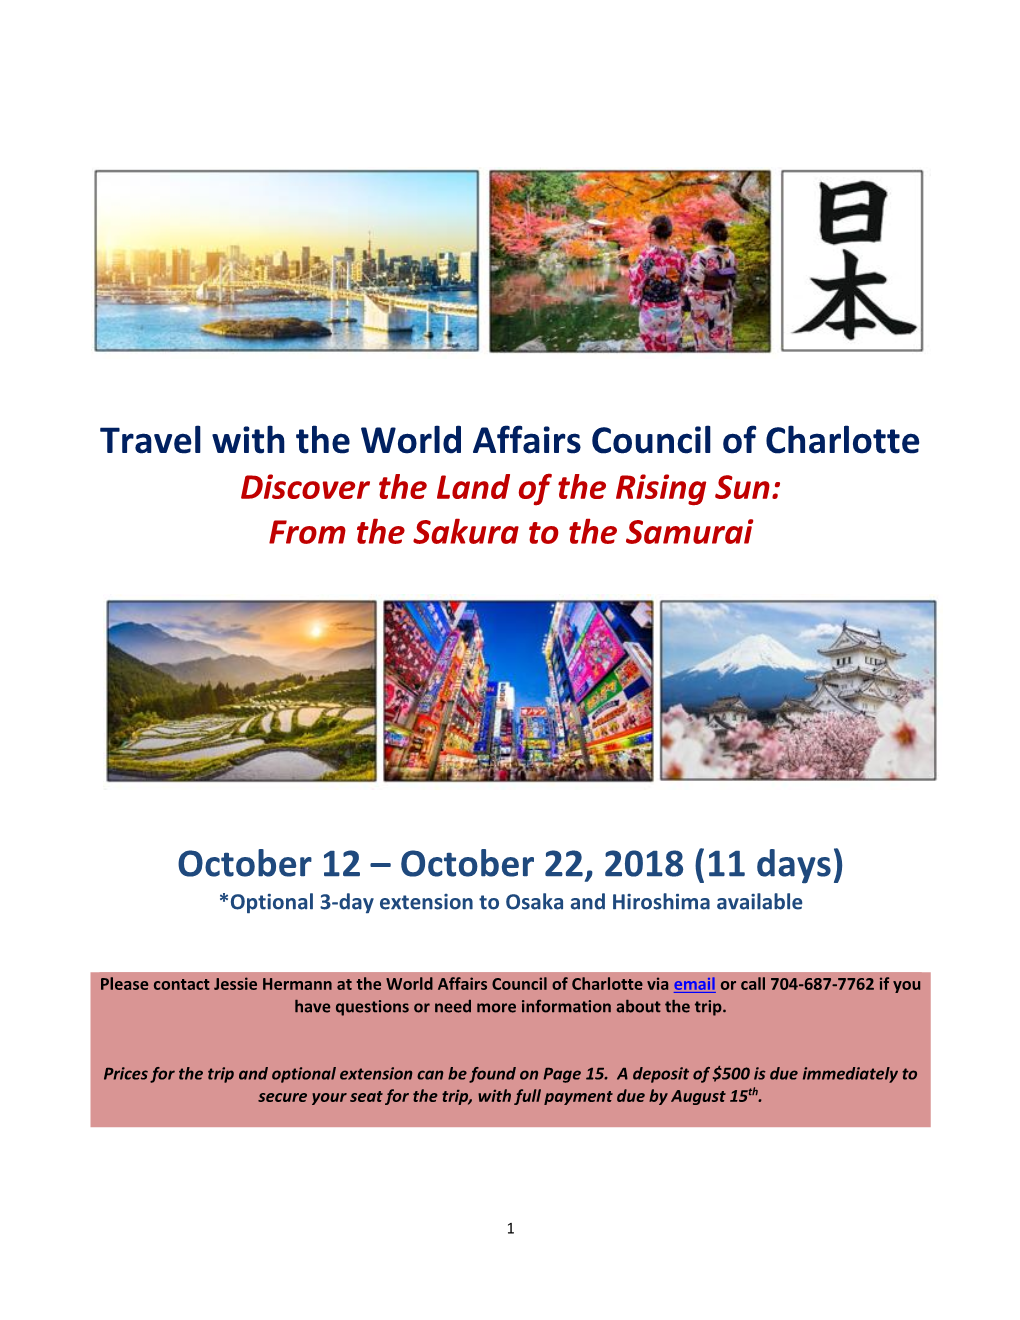 Travel with the World Affairs Council of Charlotte October 12 – October 22, 2018 (11 Days)